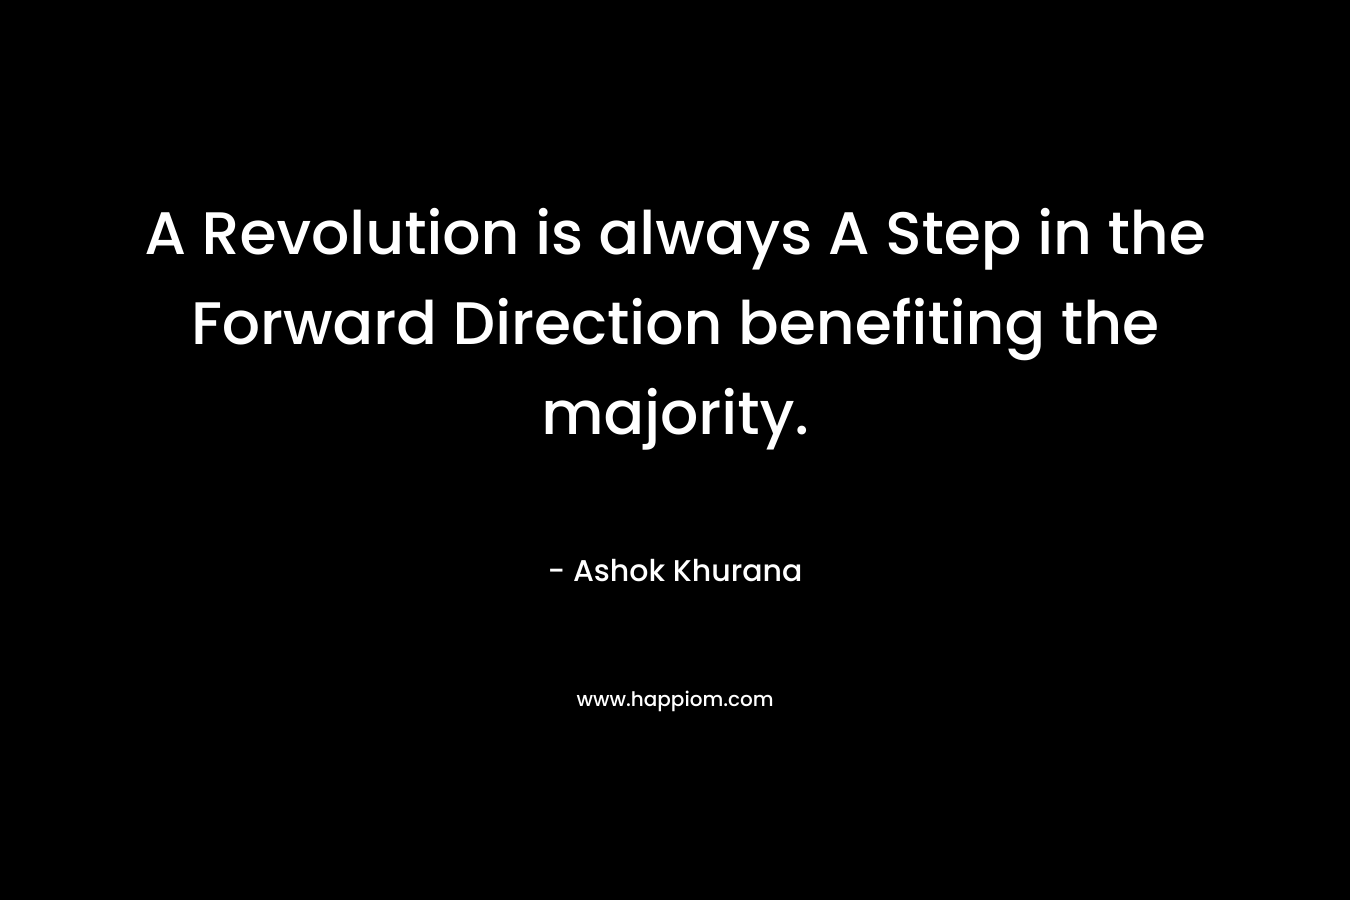 A Revolution is always A Step in the Forward Direction benefiting the majority.